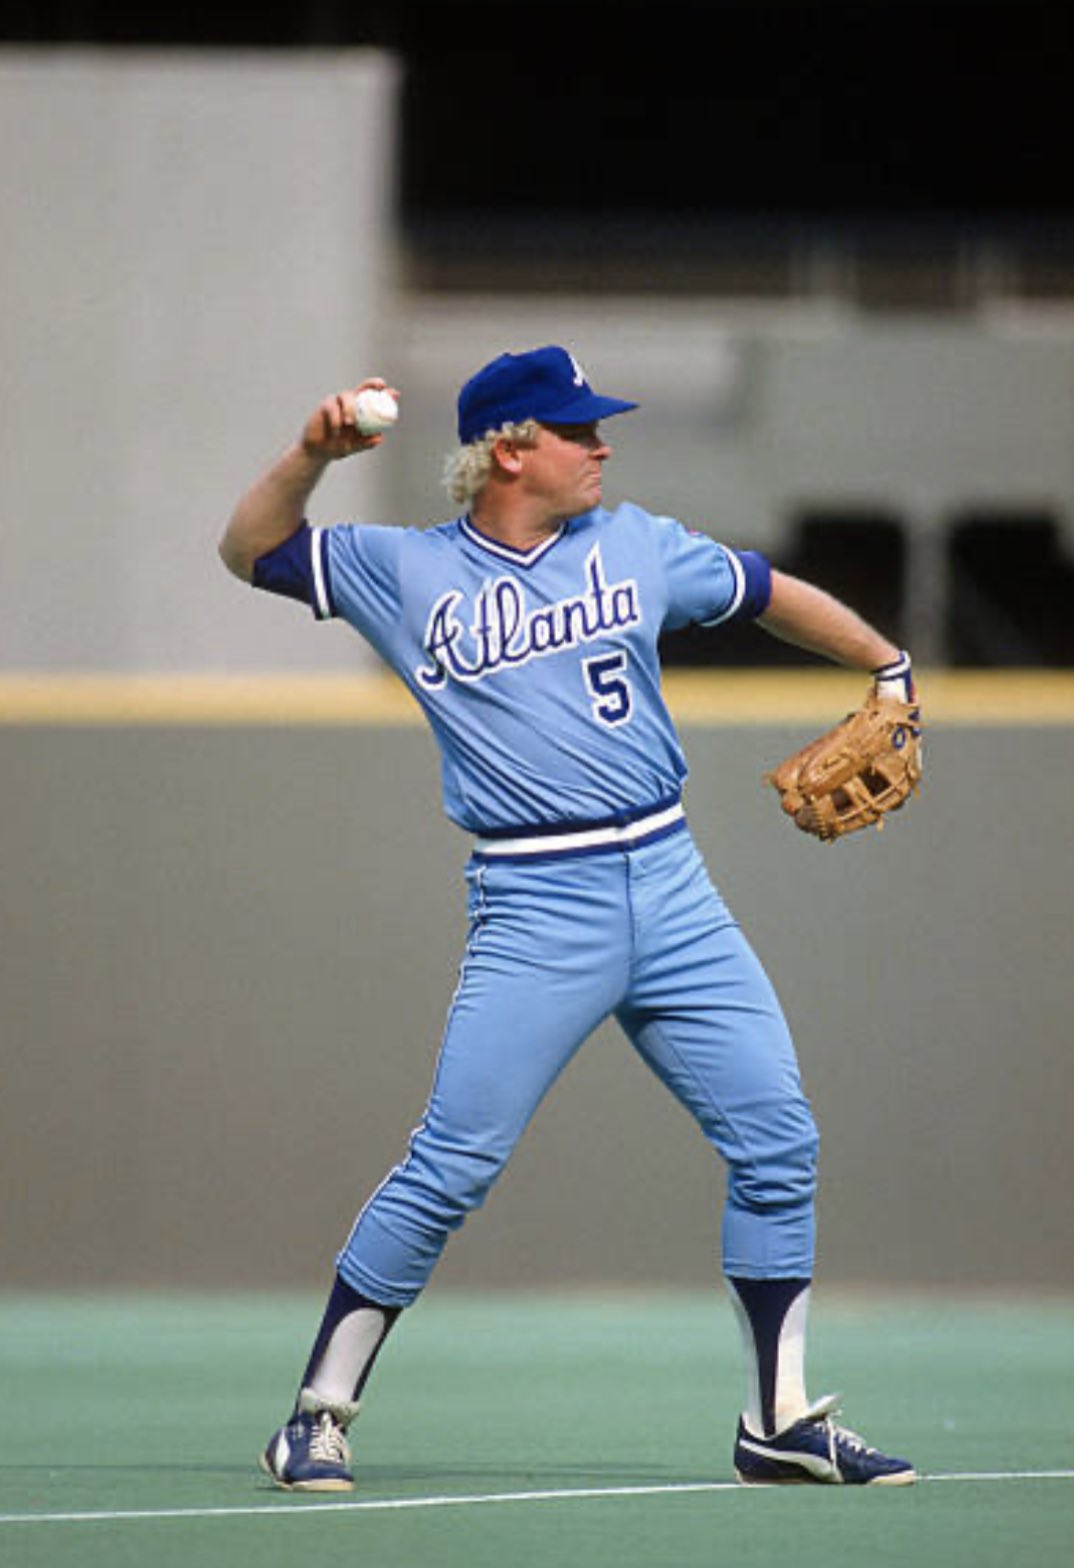 Goat Jerseys on X: Bob Horner has a birthday today⚾️ Look at that blond  Afro coming through the cap and the Puma turf shoes. Batting glove under  the mitt, and a fantastic